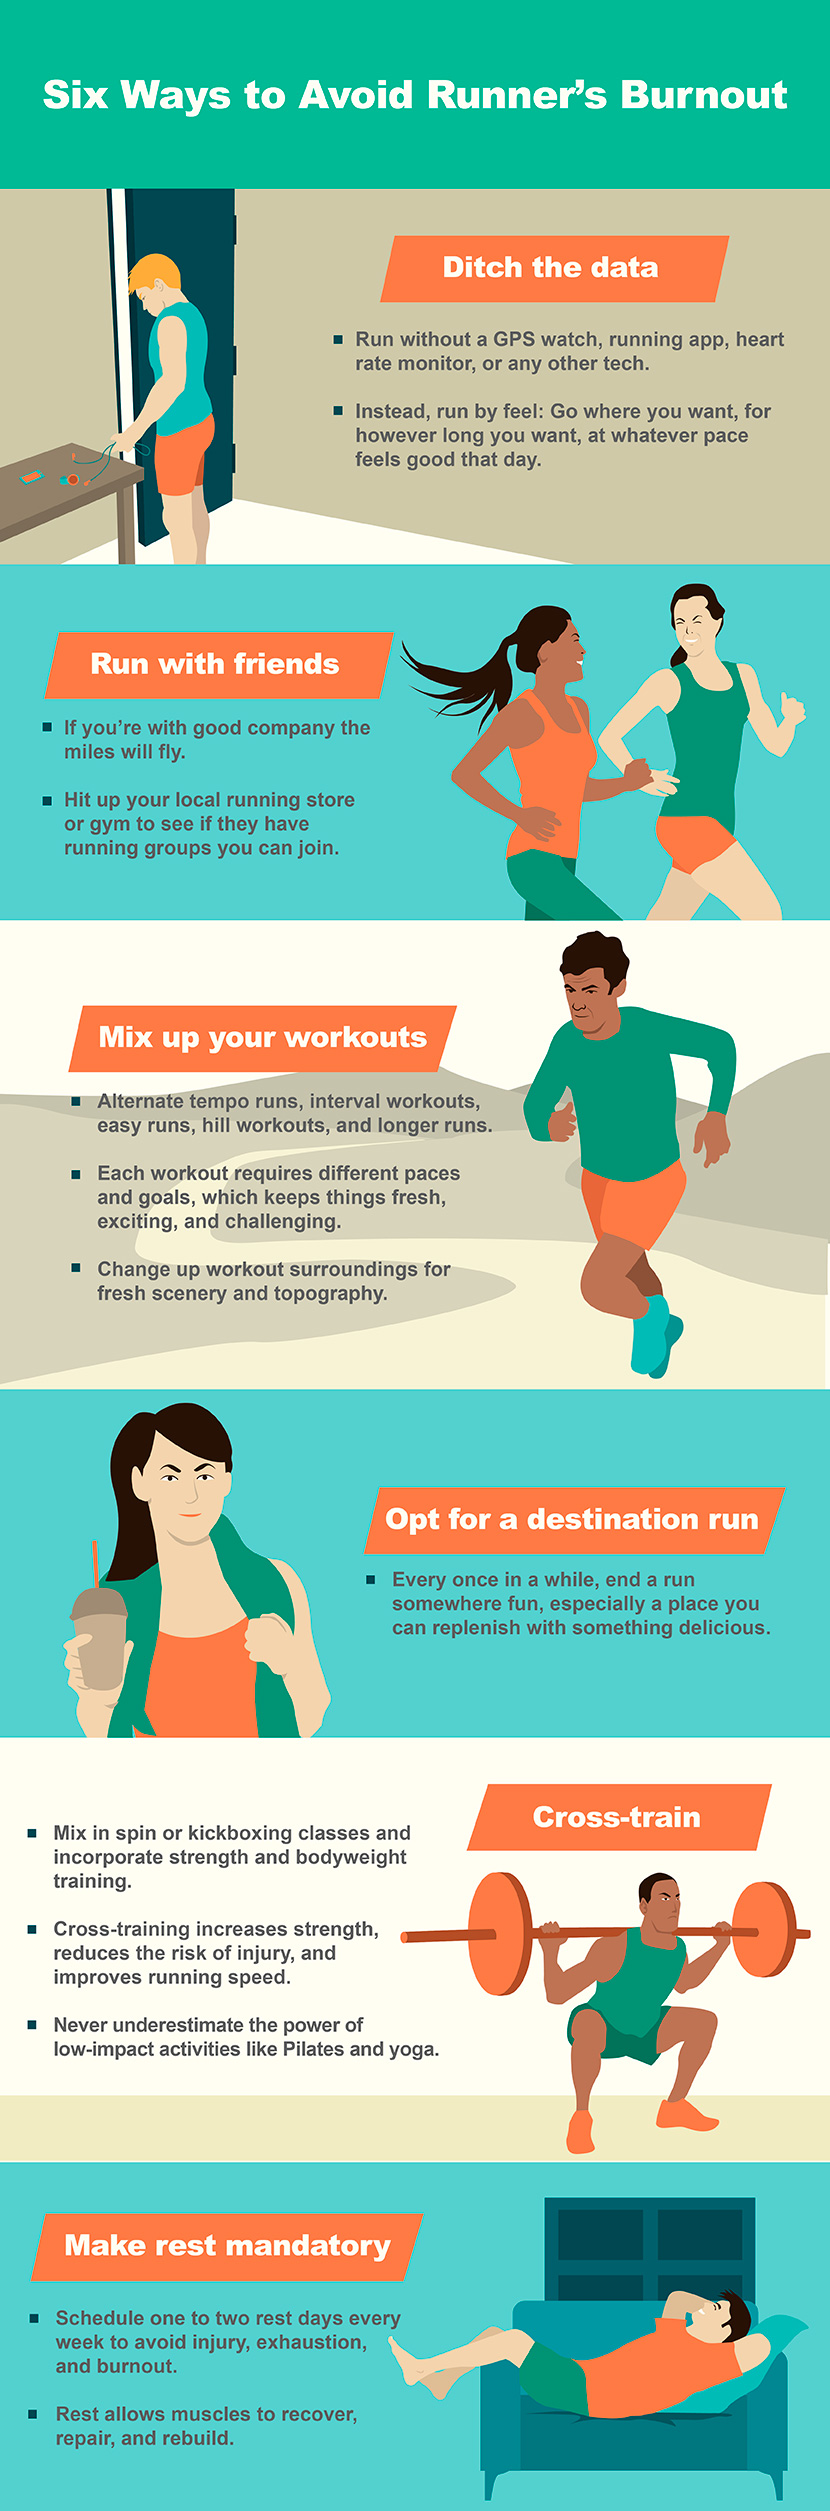 Runners Burnout: 6 Ways to Avoid Burnout